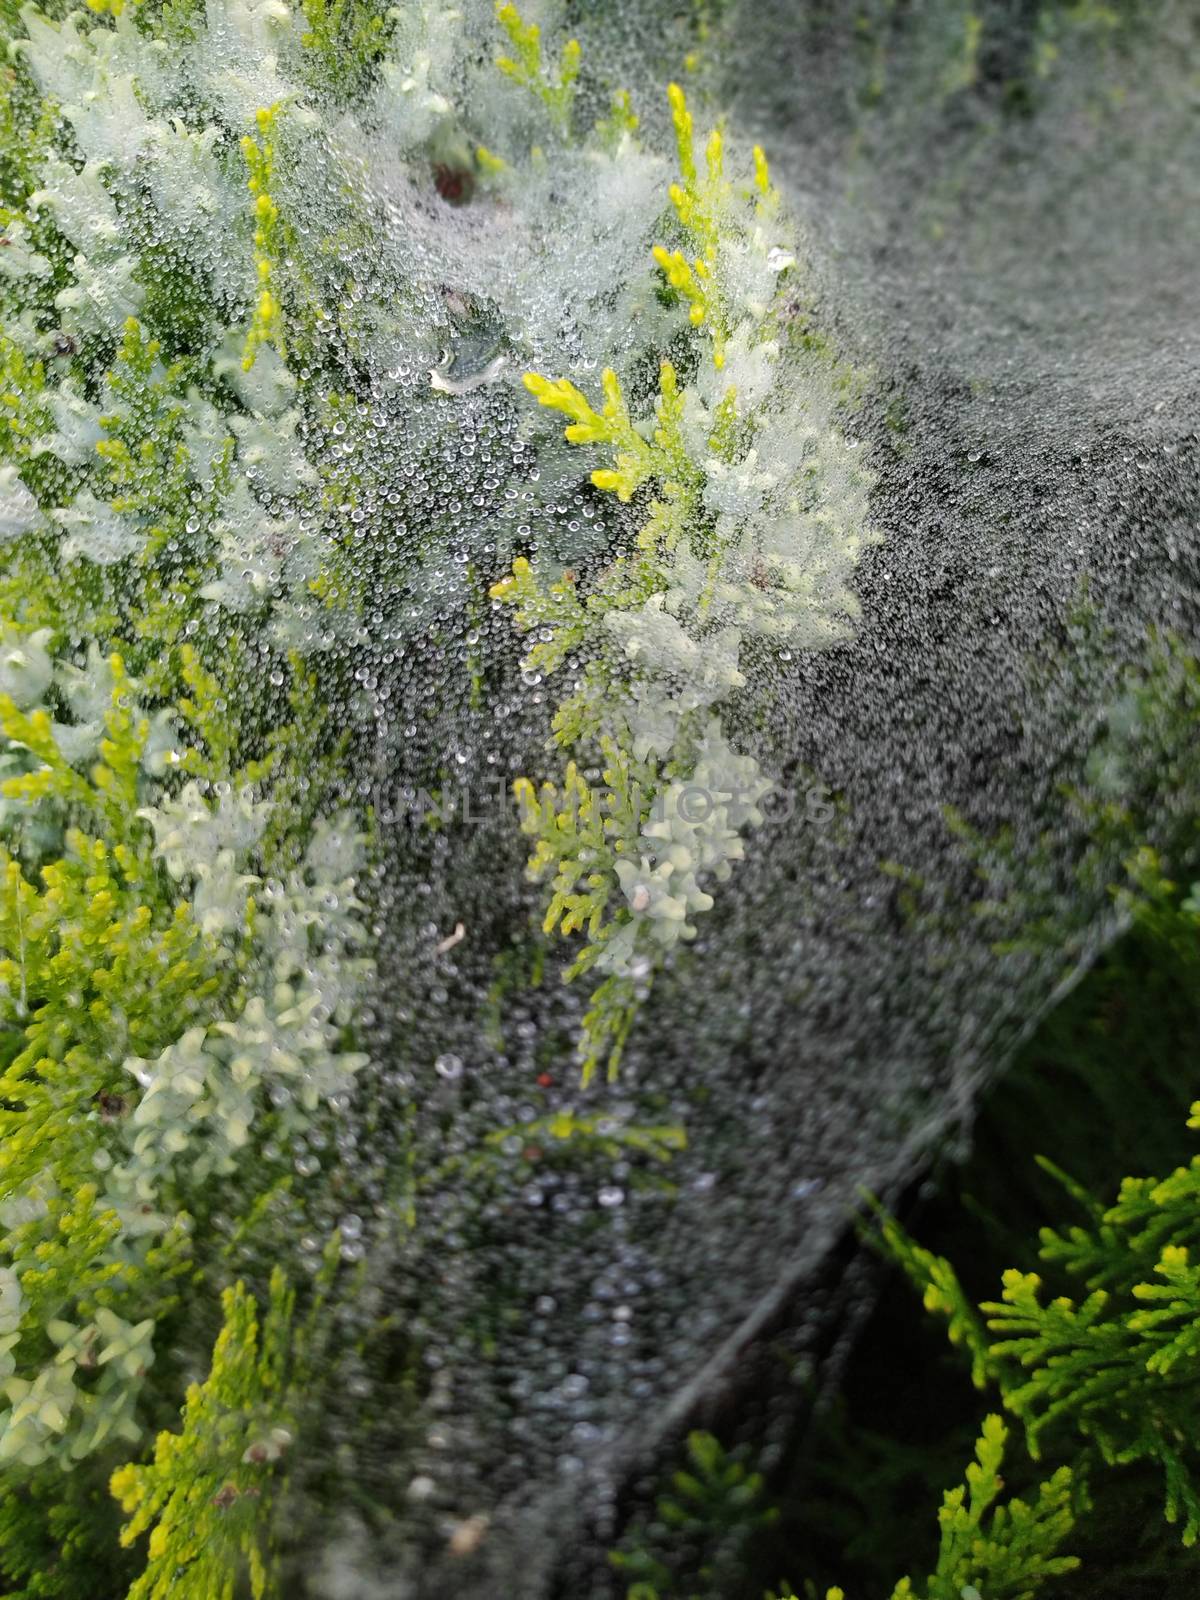 droplets of rain on the spider web